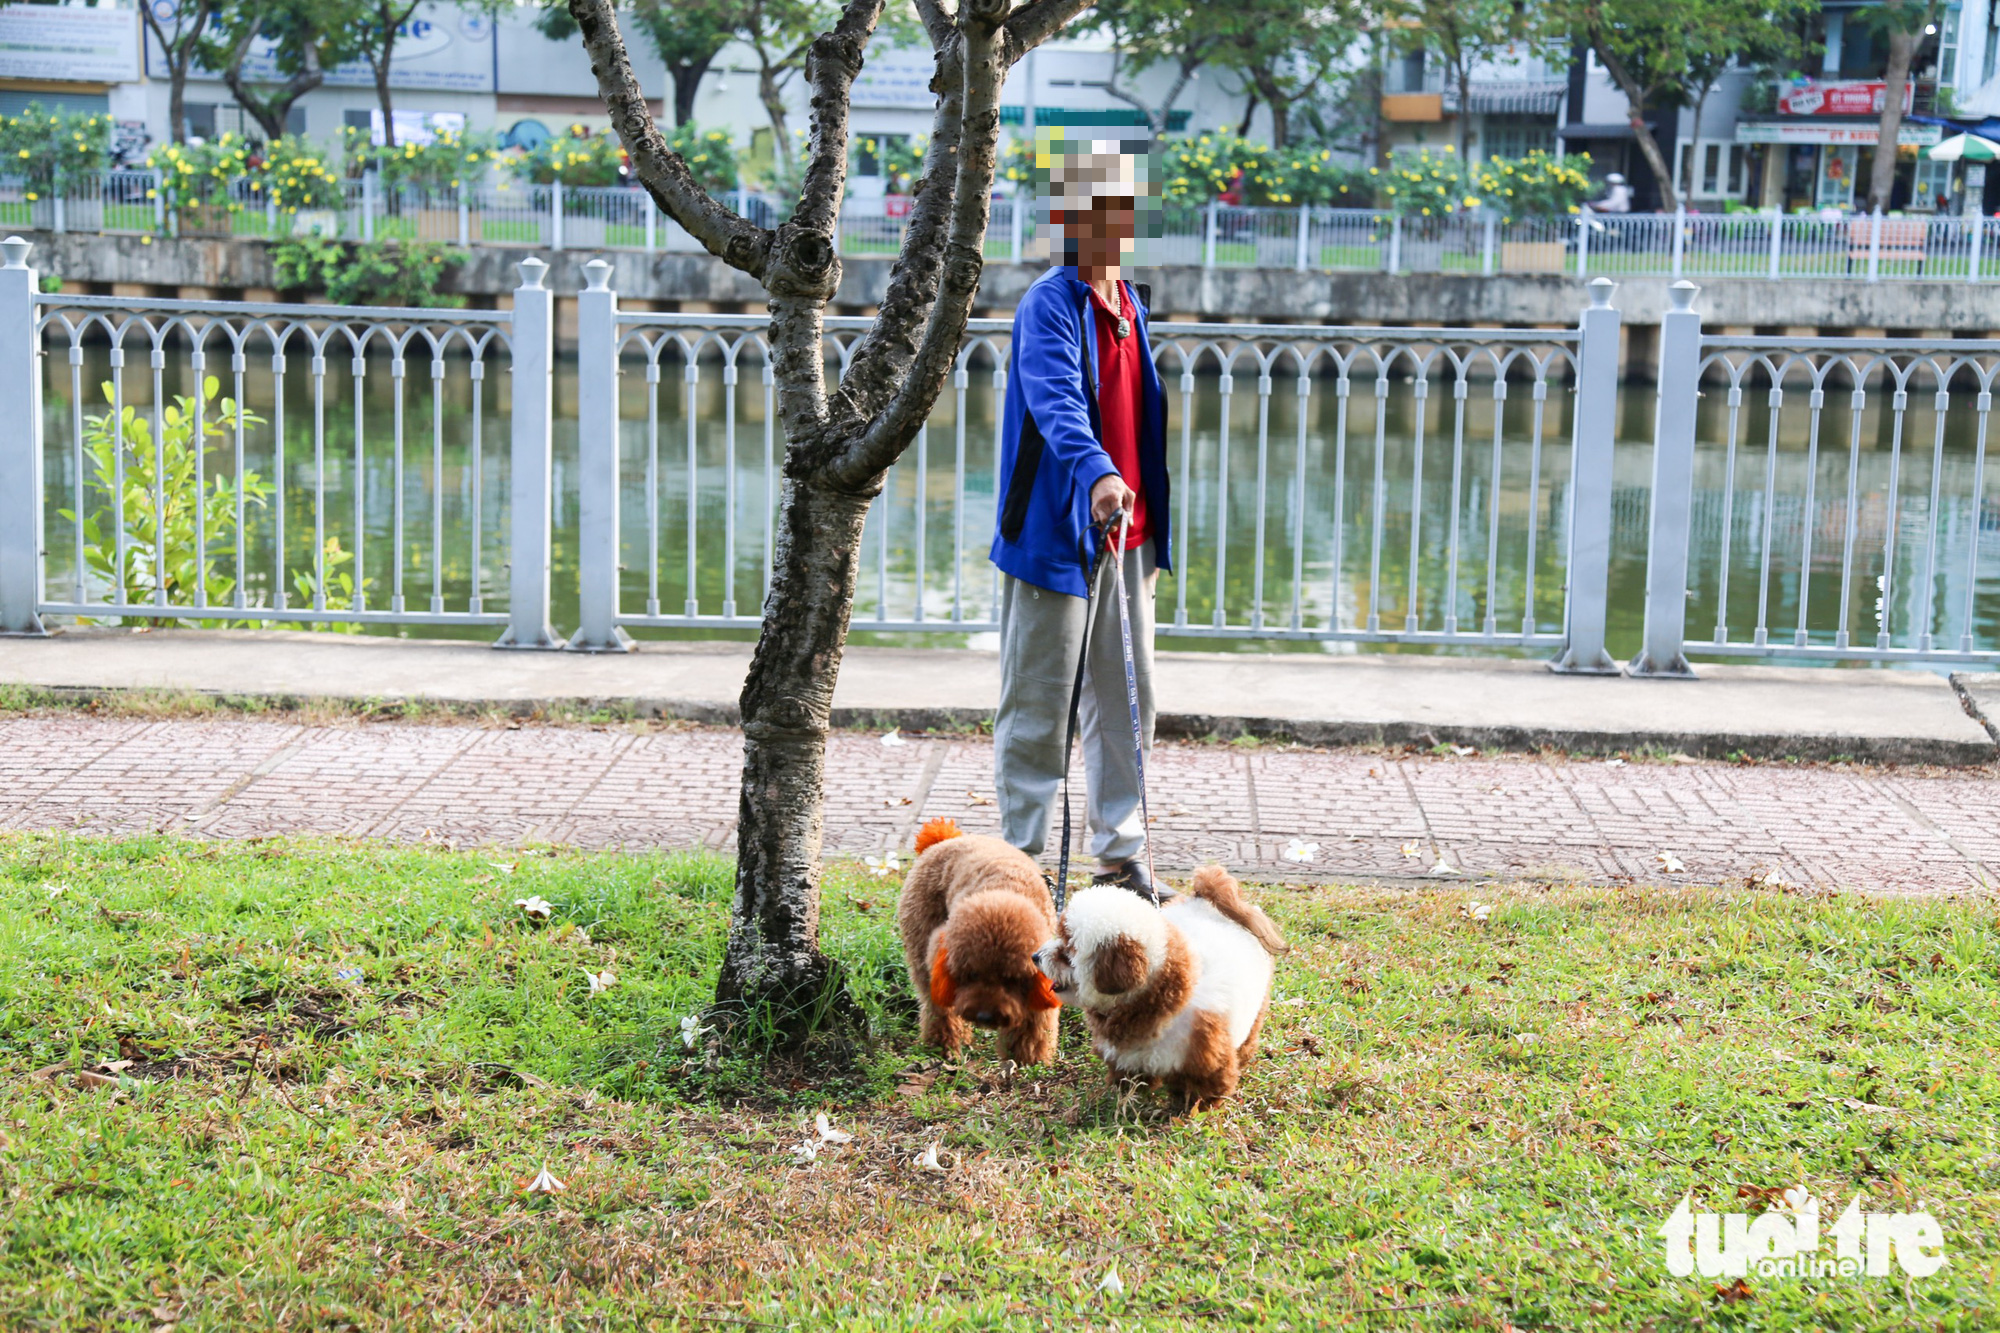 A person takes two dogs to pee at a tree along Nhieu Loc-Thi Nghe Canal in Phu Nhuan District, Ho Chi Minh City. Photo: Phuong Quyen / Tuoi Tre